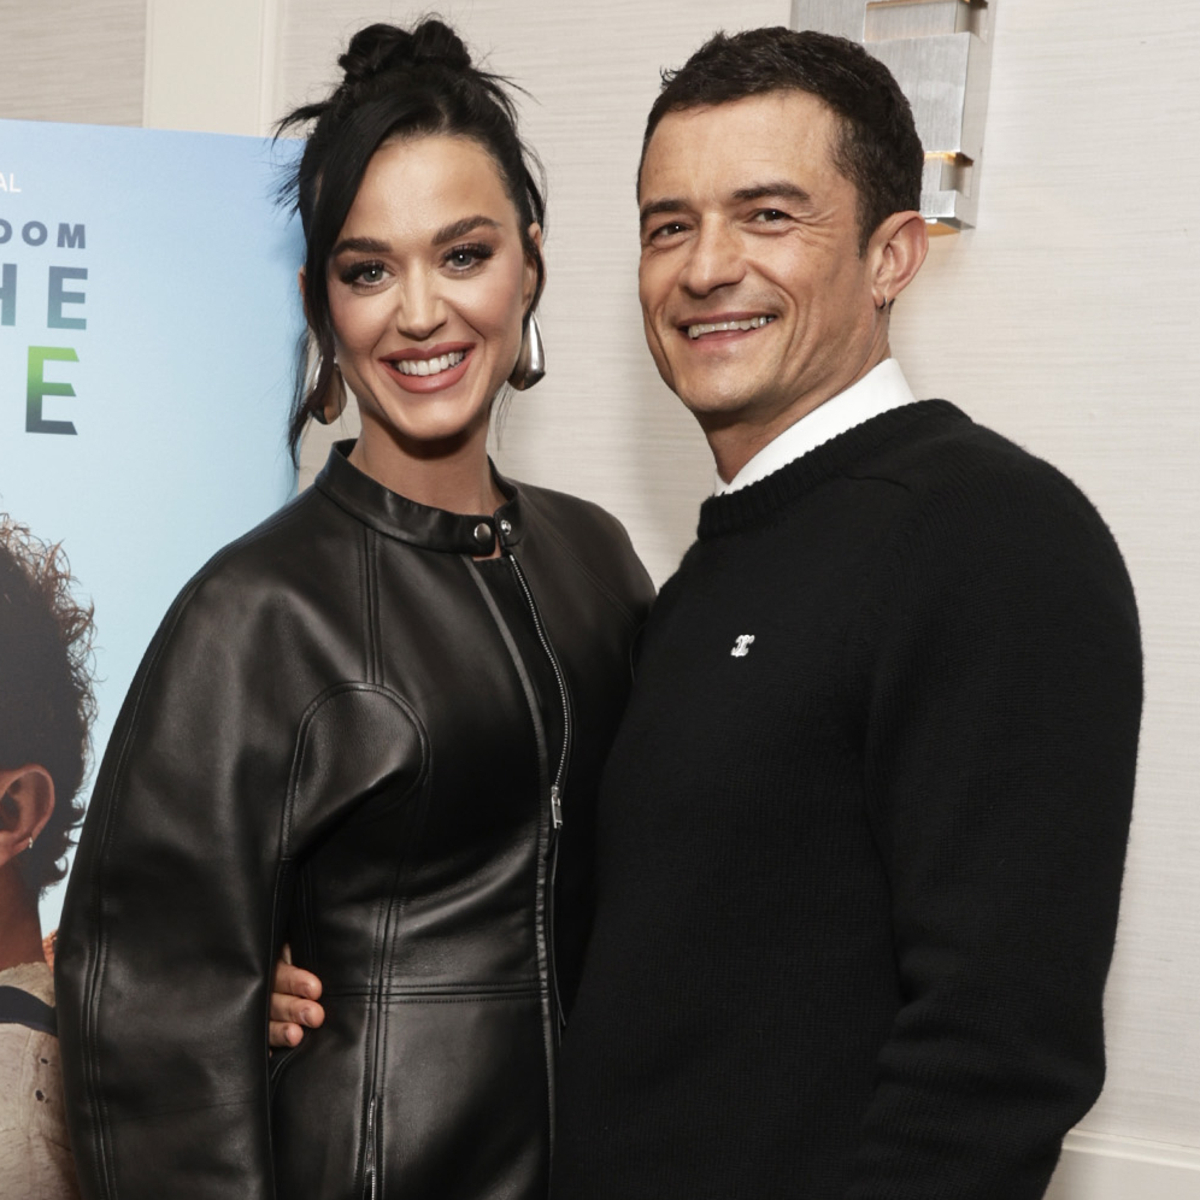 Katy Perry Shares NSFW Confession on Orlando Bloom’s “Magic Stick”